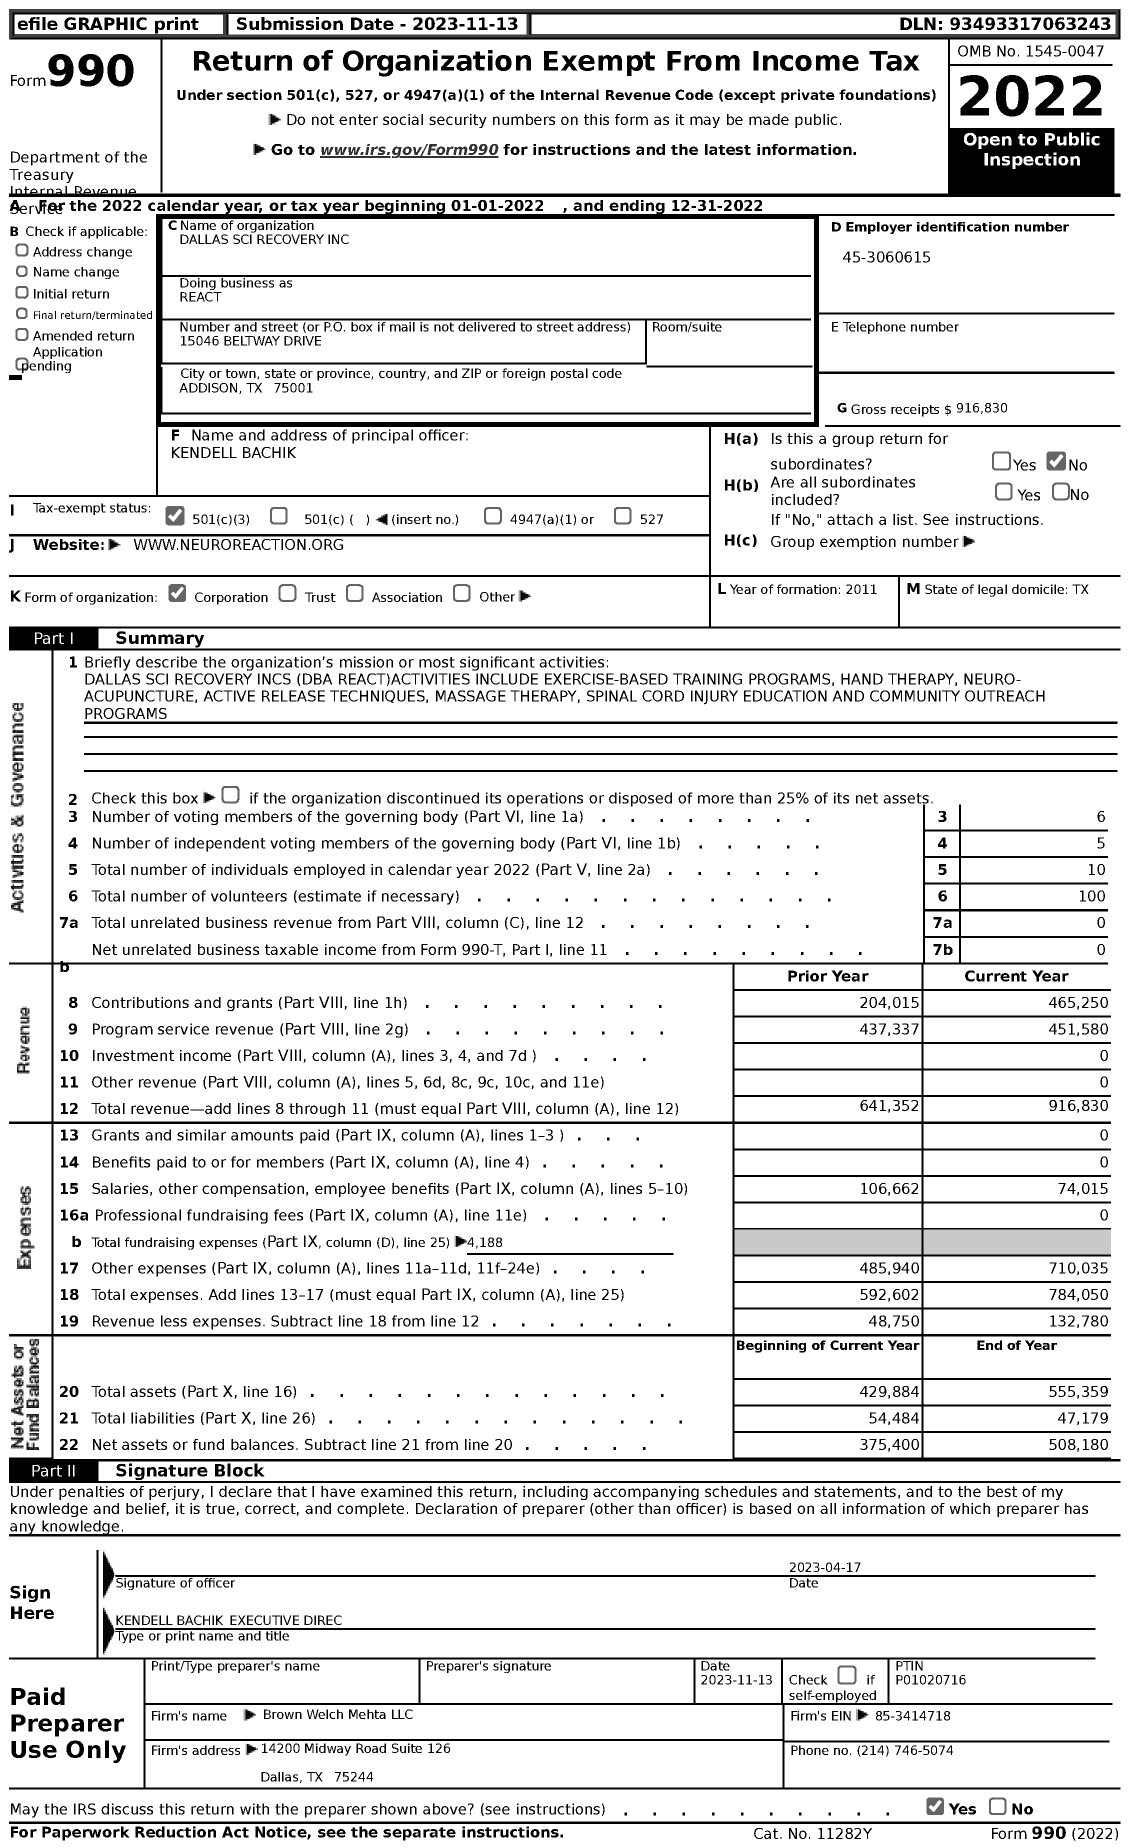 Image of first page of 2022 Form 990 for REACT / Dallas Sci Recovery Inc